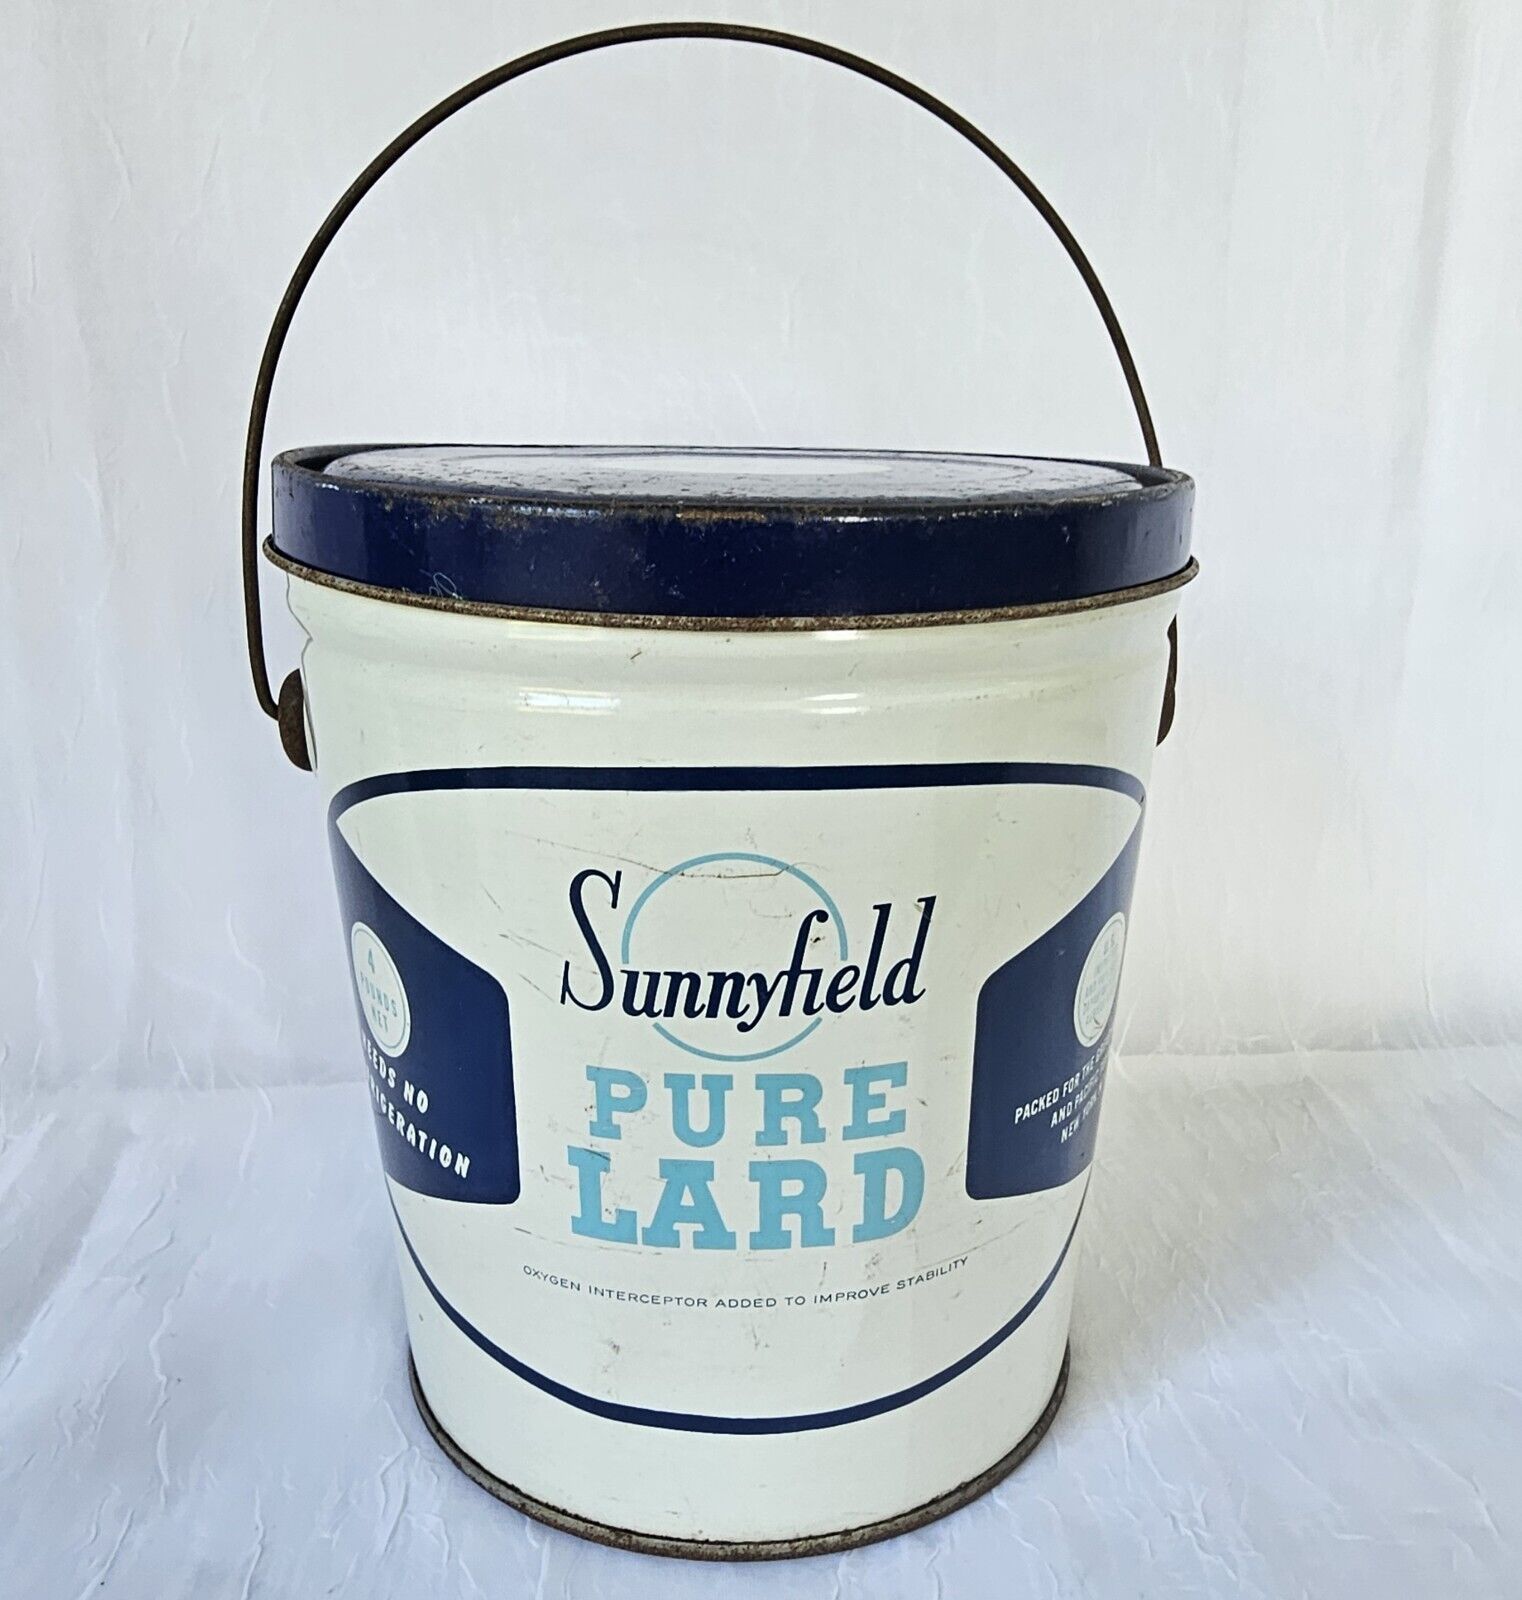 Vintage  A&P  SUNNYFIELD PURE LARD Metal Lard  Can with Lid & Handle